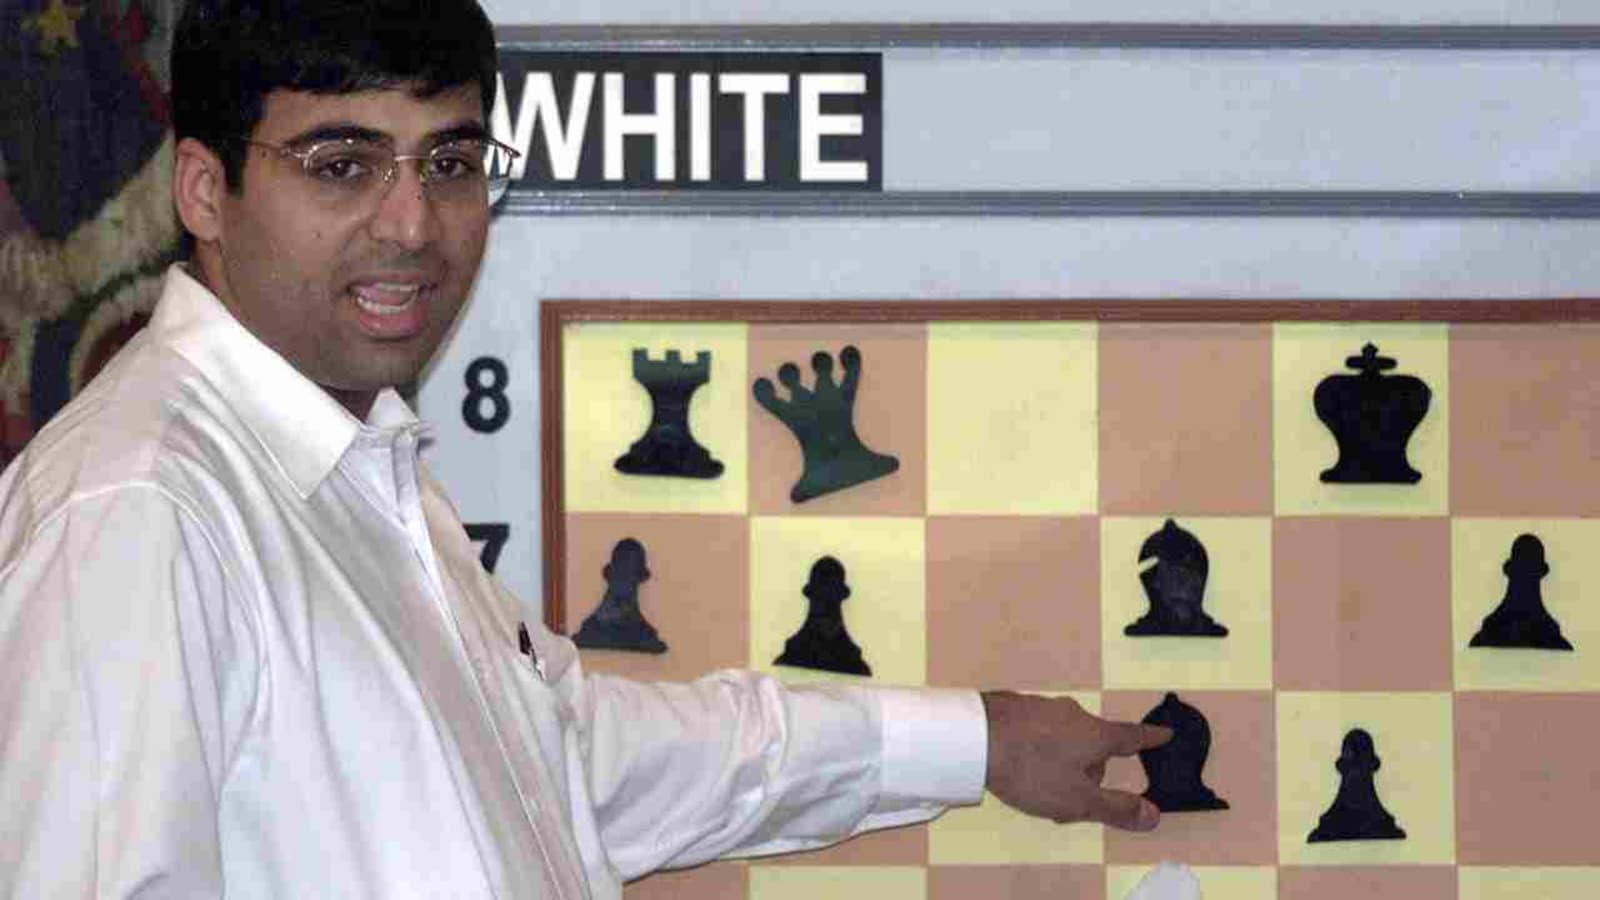 Viswanathan Anand symbol of India's tech prowess'-Sports News , Firstpost